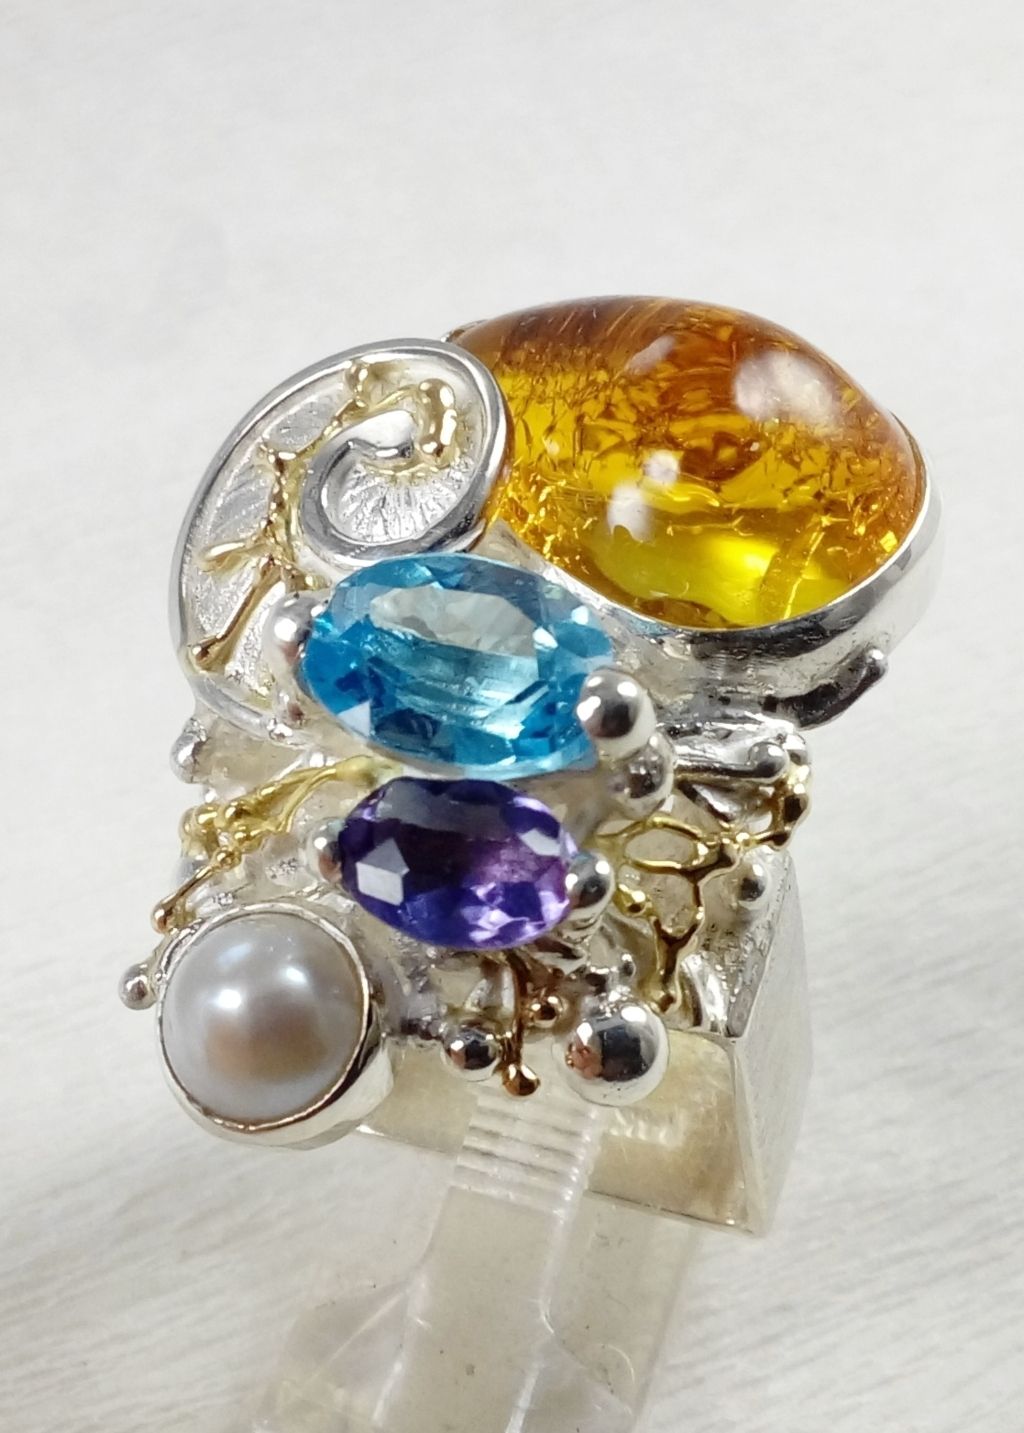 jewelry made from gold and silver, jewelry with color stones, jewelry with real pearls, gregory pyra piro square ring 4822, where to find an auction house with gemstones and jewellery, fine craft gallery handcrafted ring for sale, sterling silver and 14 karat gold ring, ring with amethyst and blue topaz, ring with blue topaz and amber, ring with amethyst and amber, one of a kind handcrafted ring, where to find auctions with fine art and designer jewellery, where to buy gregory pyra piro jewelry right now